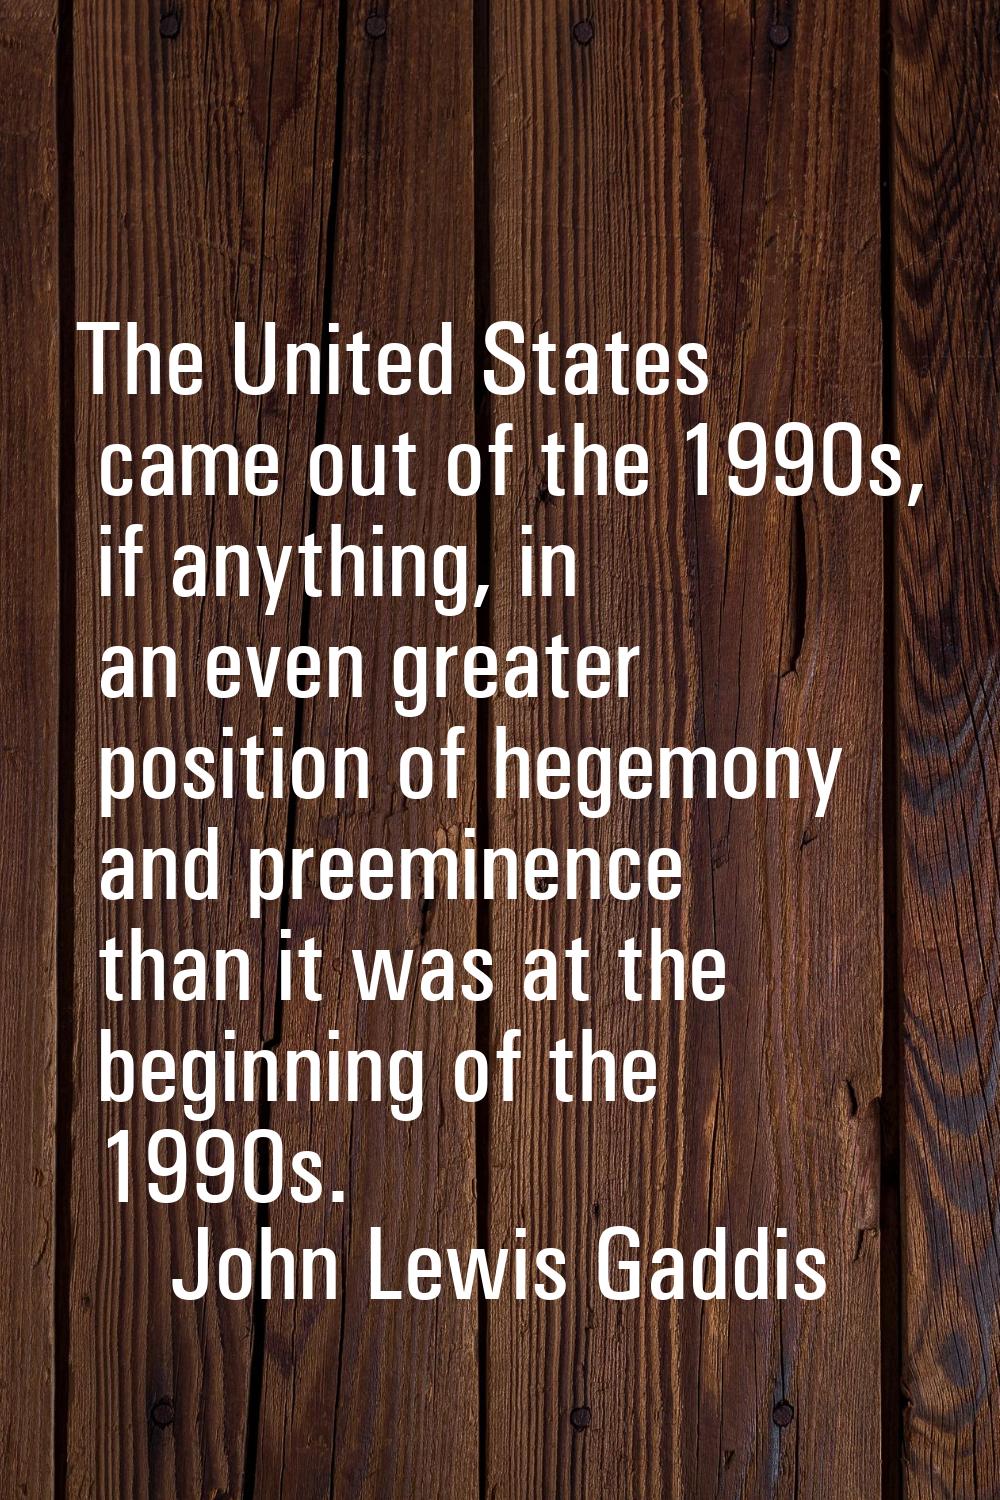 The United States came out of the 1990s, if anything, in an even greater position of hegemony and p